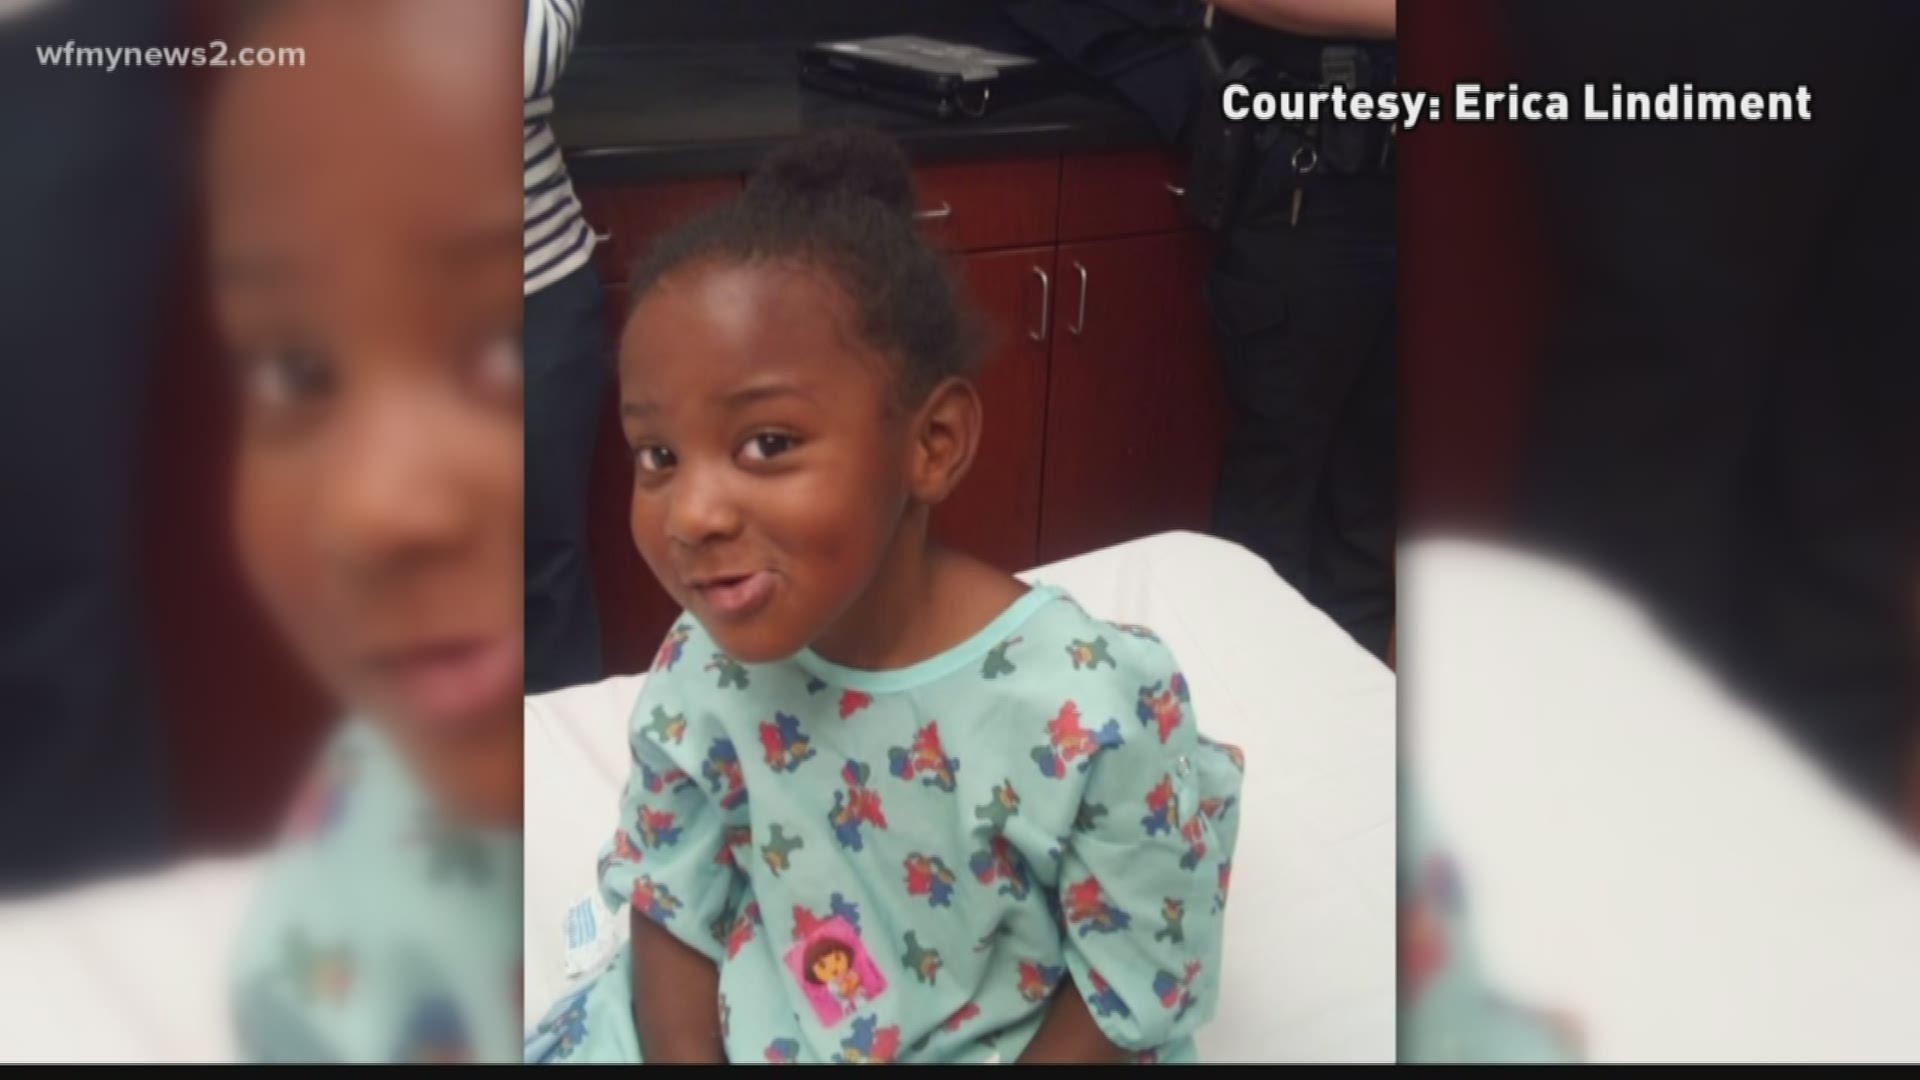 The little girl's mom met her at the hospital, and is relieved that she's safe.